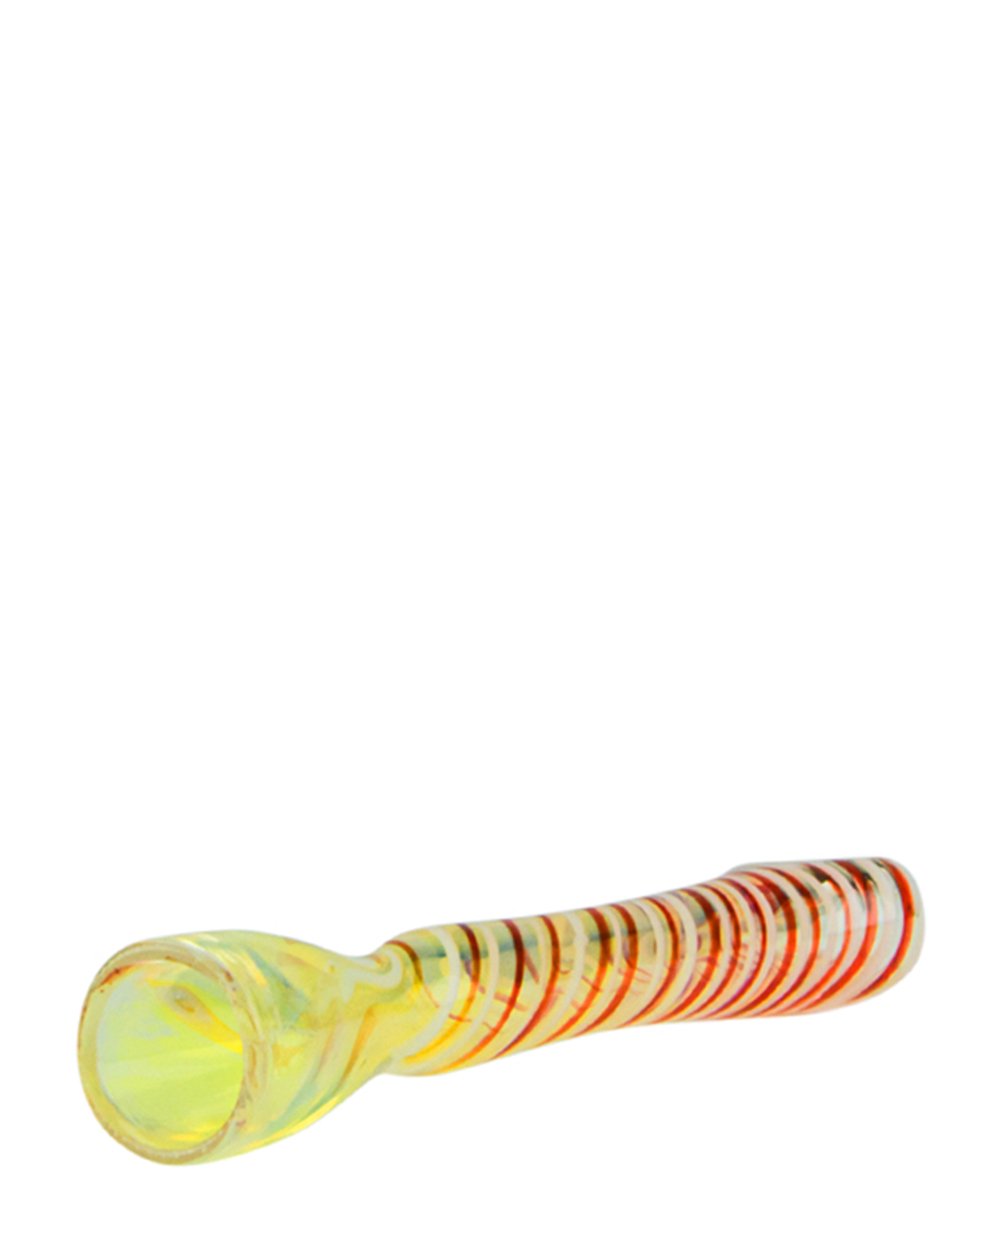 Spiral & Gold Fumed Chillum Hand Pipe | 5in Long - Glass - Assorted - 3